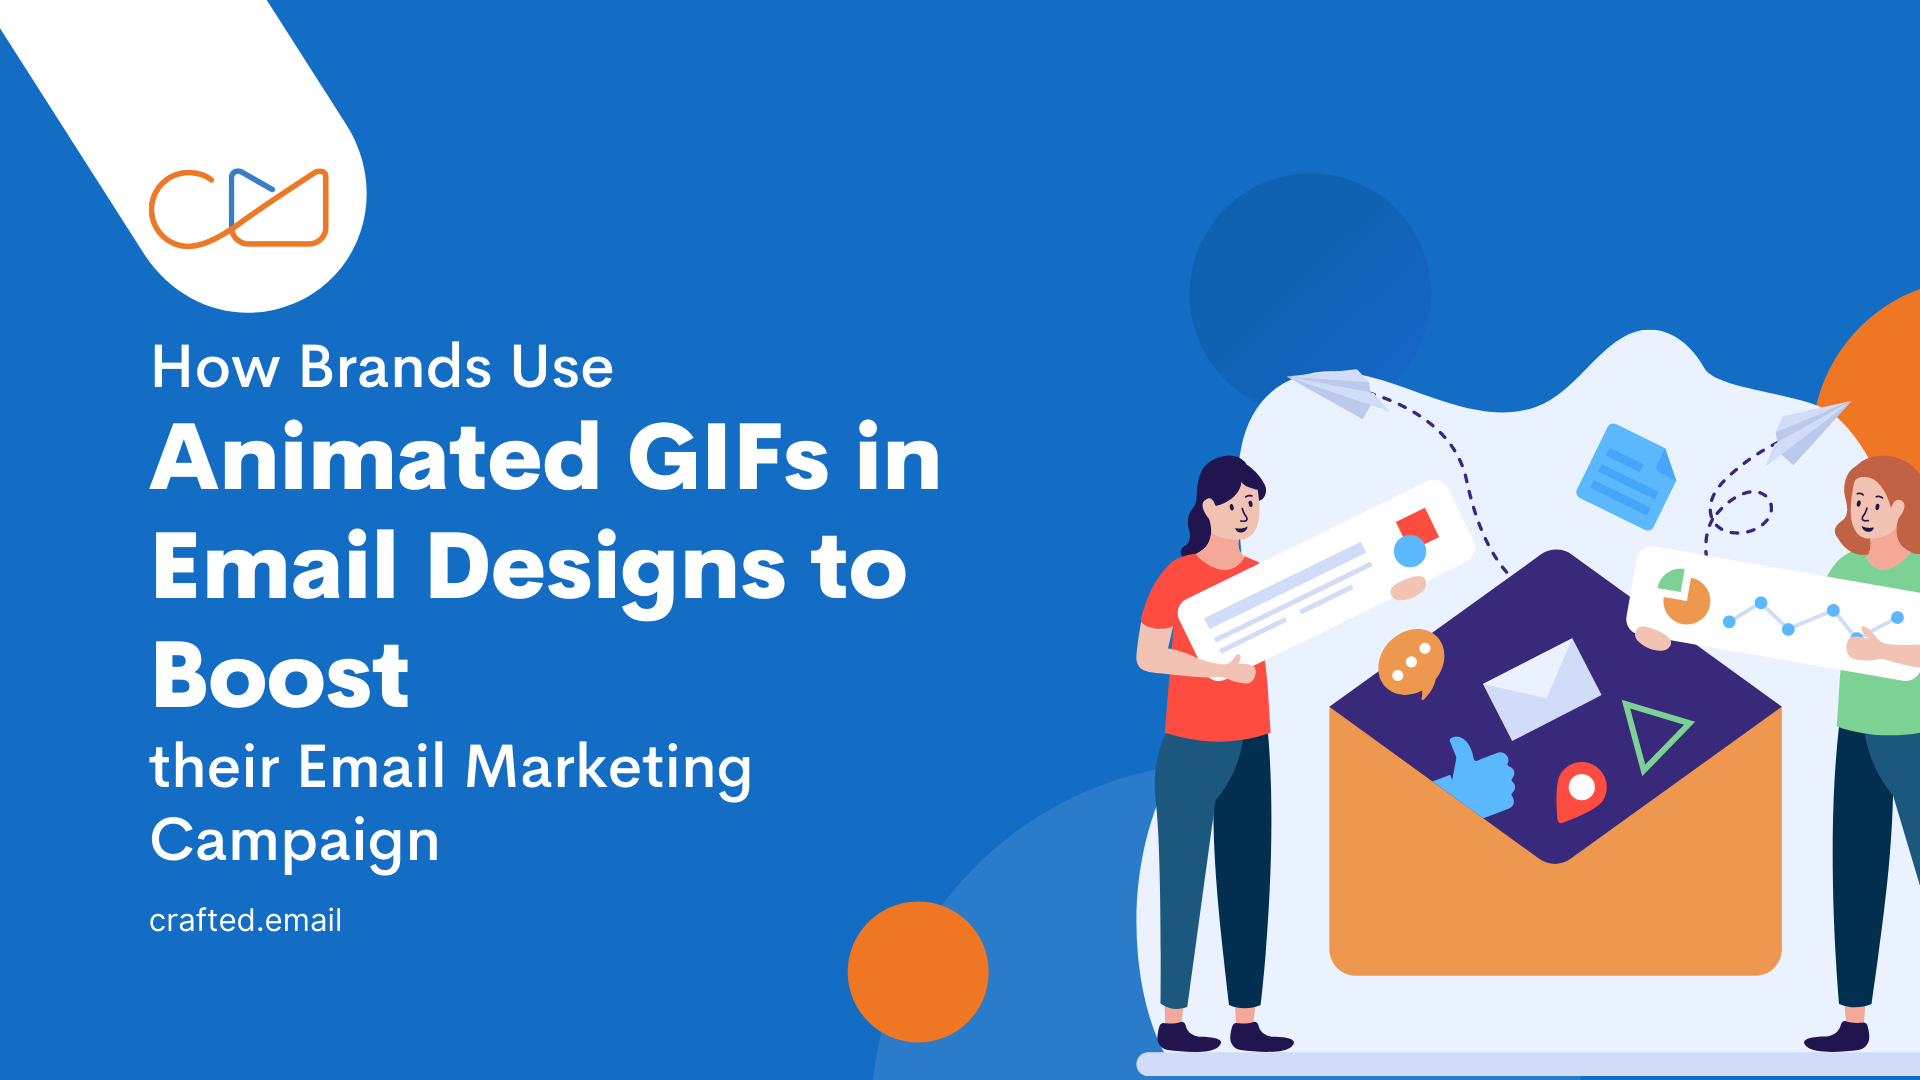 How Brands Use Animated GIFs in Email Designs to Boost their Email Marketing Campaign